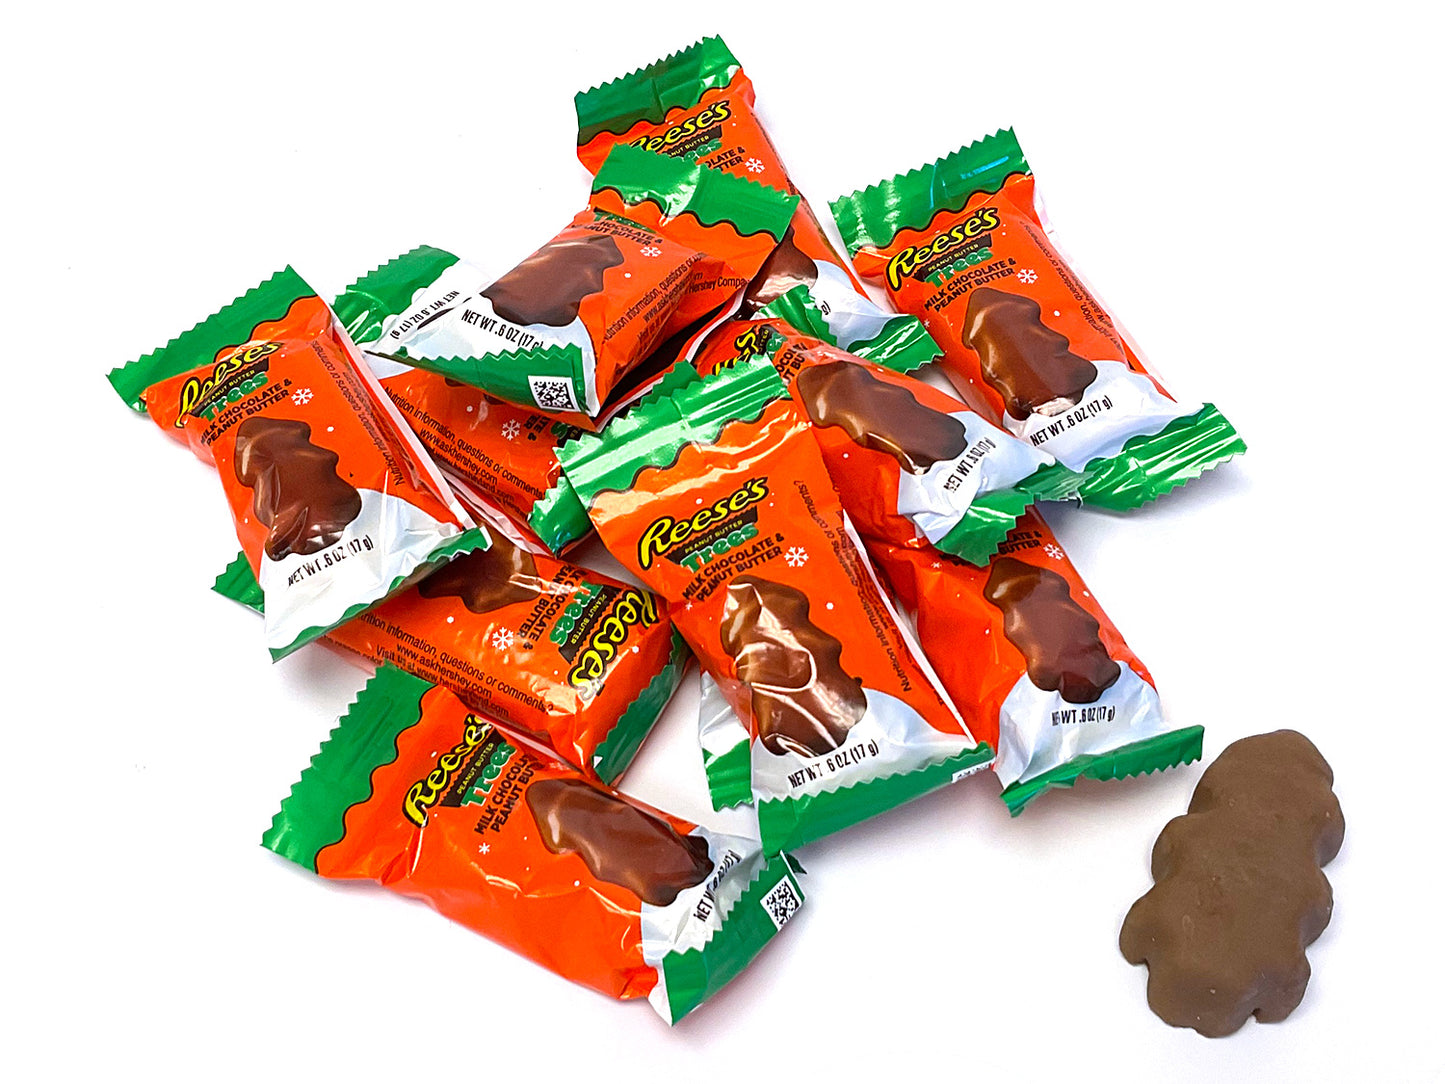 Reese's Peanut Butter Trees - Snack Size - open